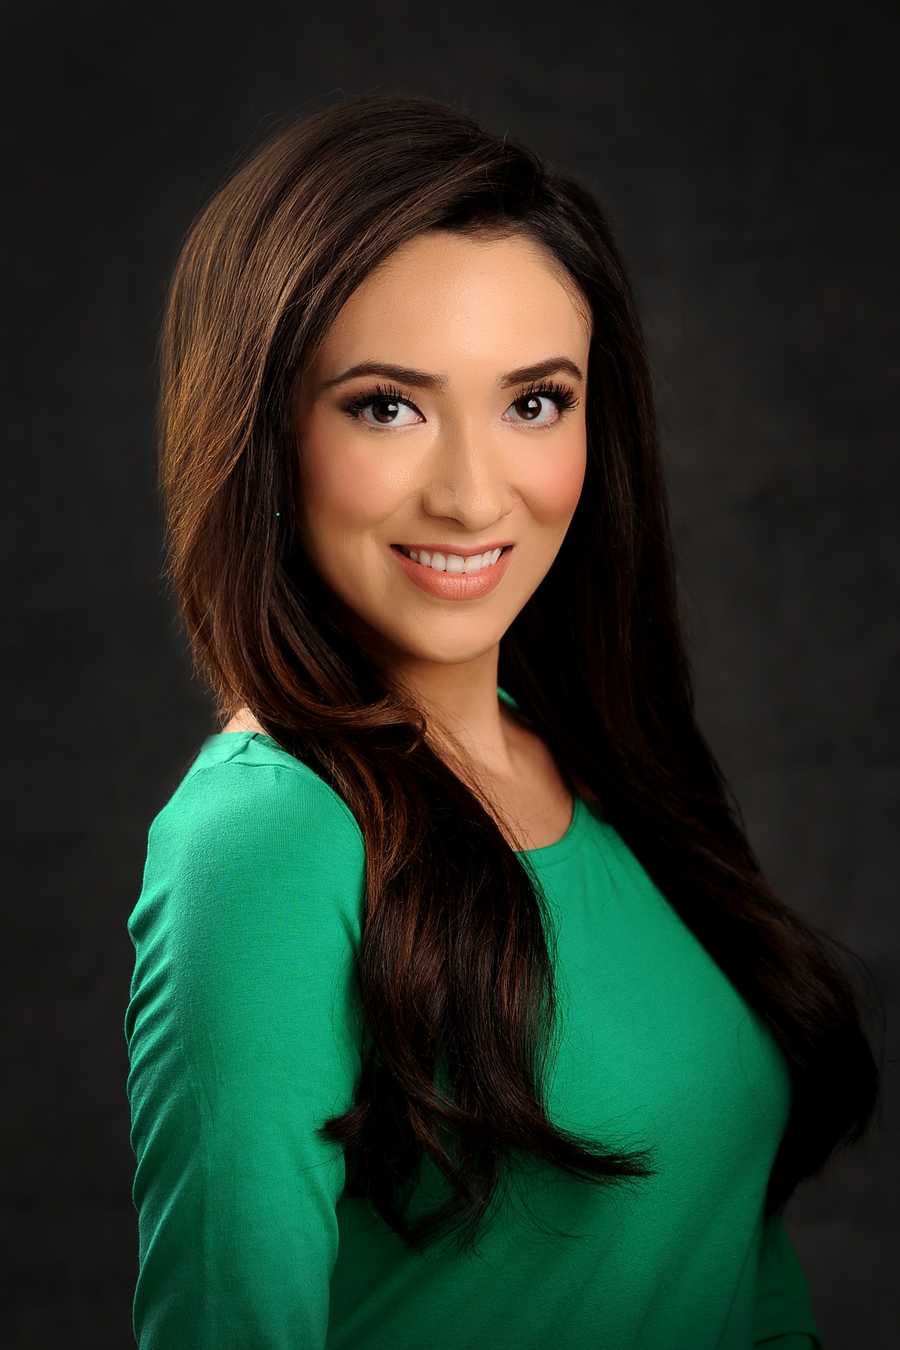 Meet the 2015 Miss New Mexico contestants